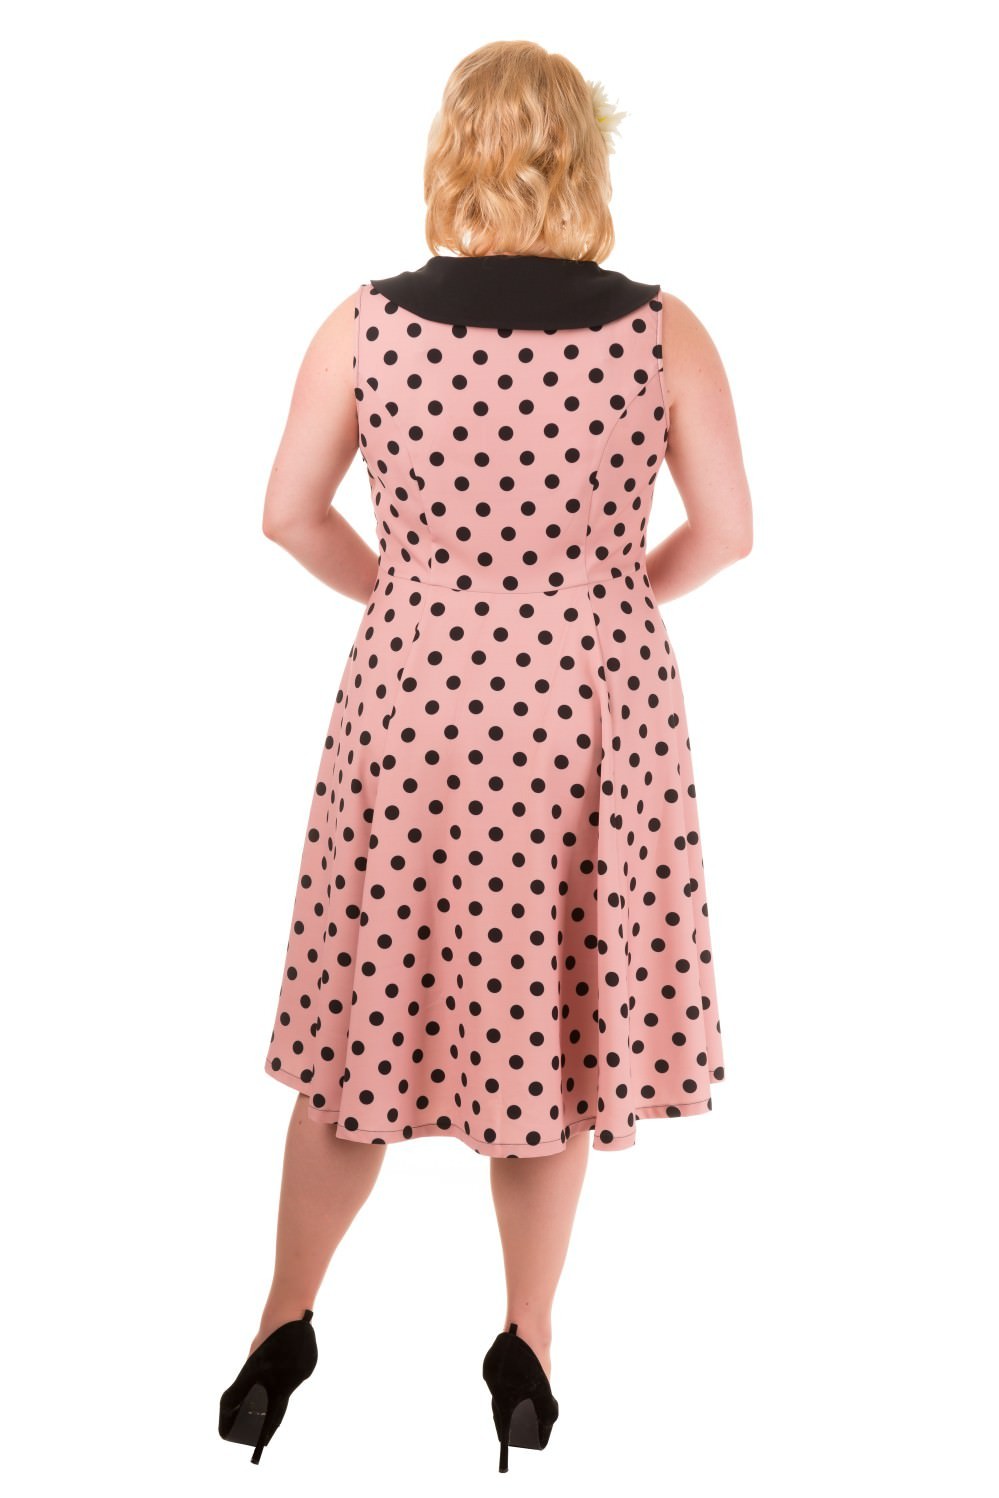 Pin Up Vintage Style Polka Dot Short Sleeve Party Dress - SOLD OUT